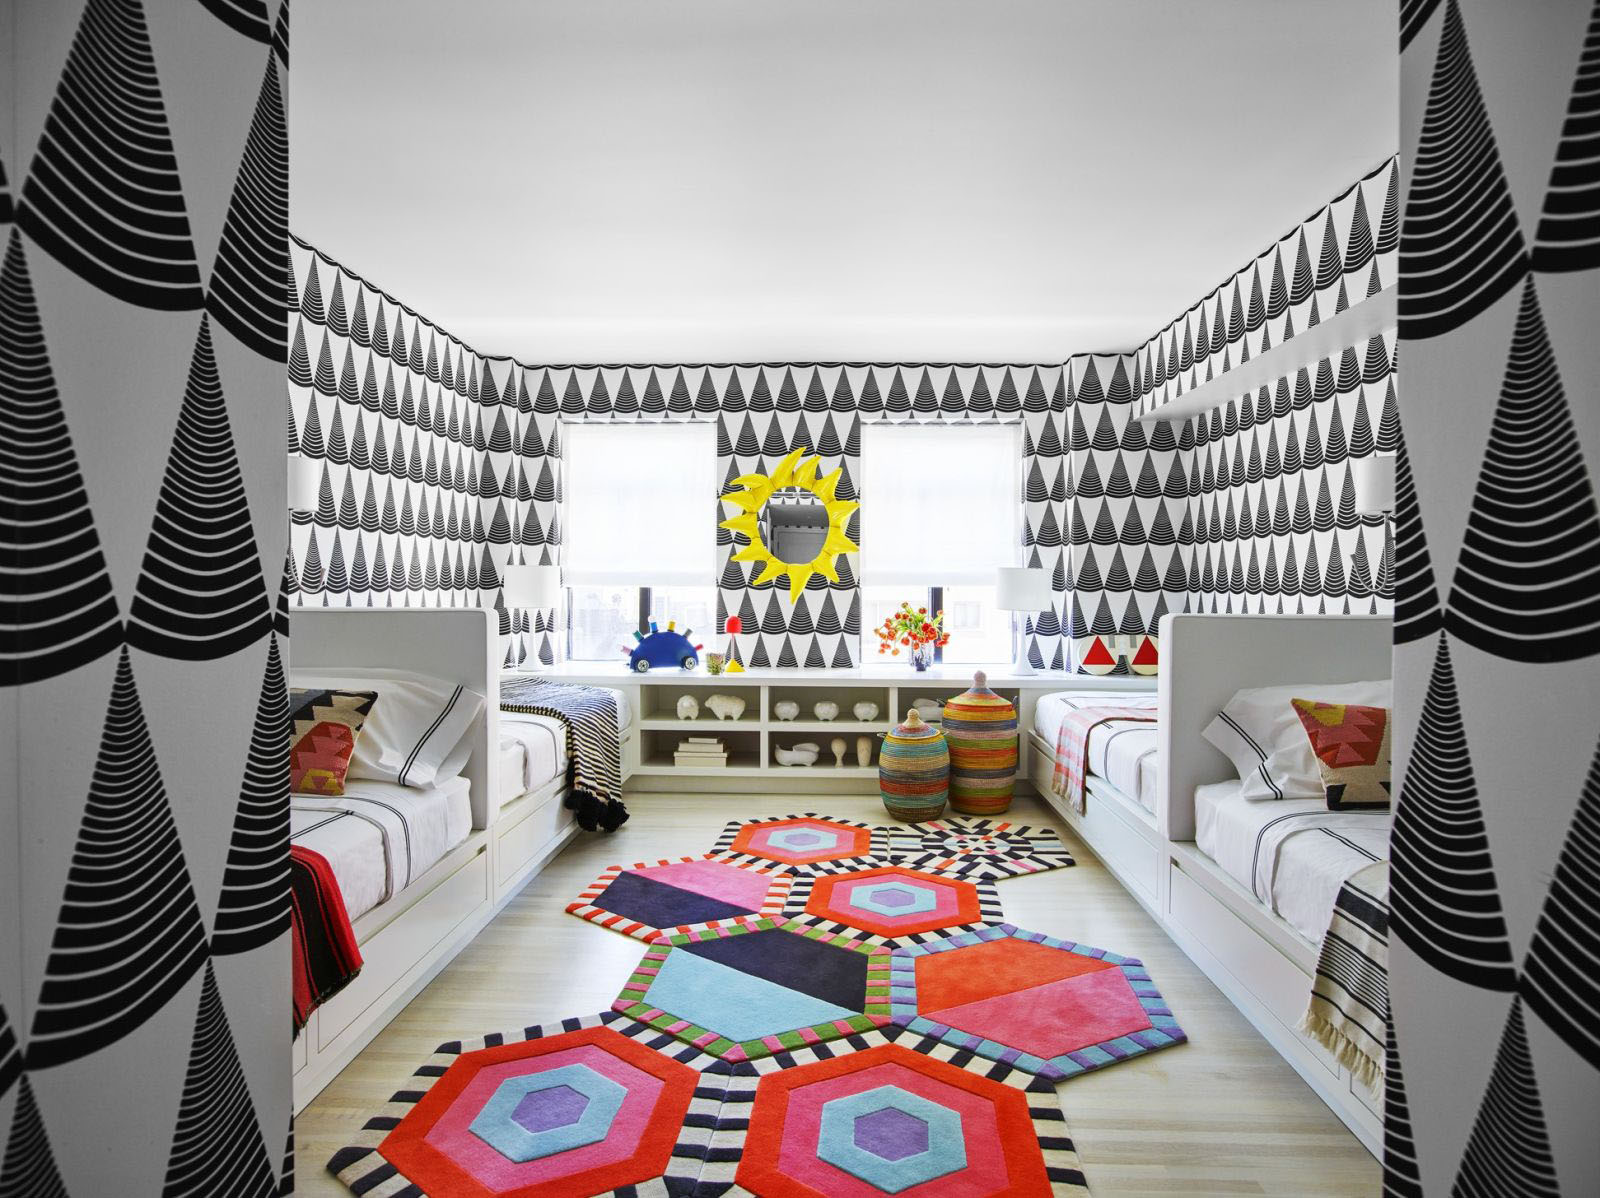 Children's Room Decor with Bold Colors